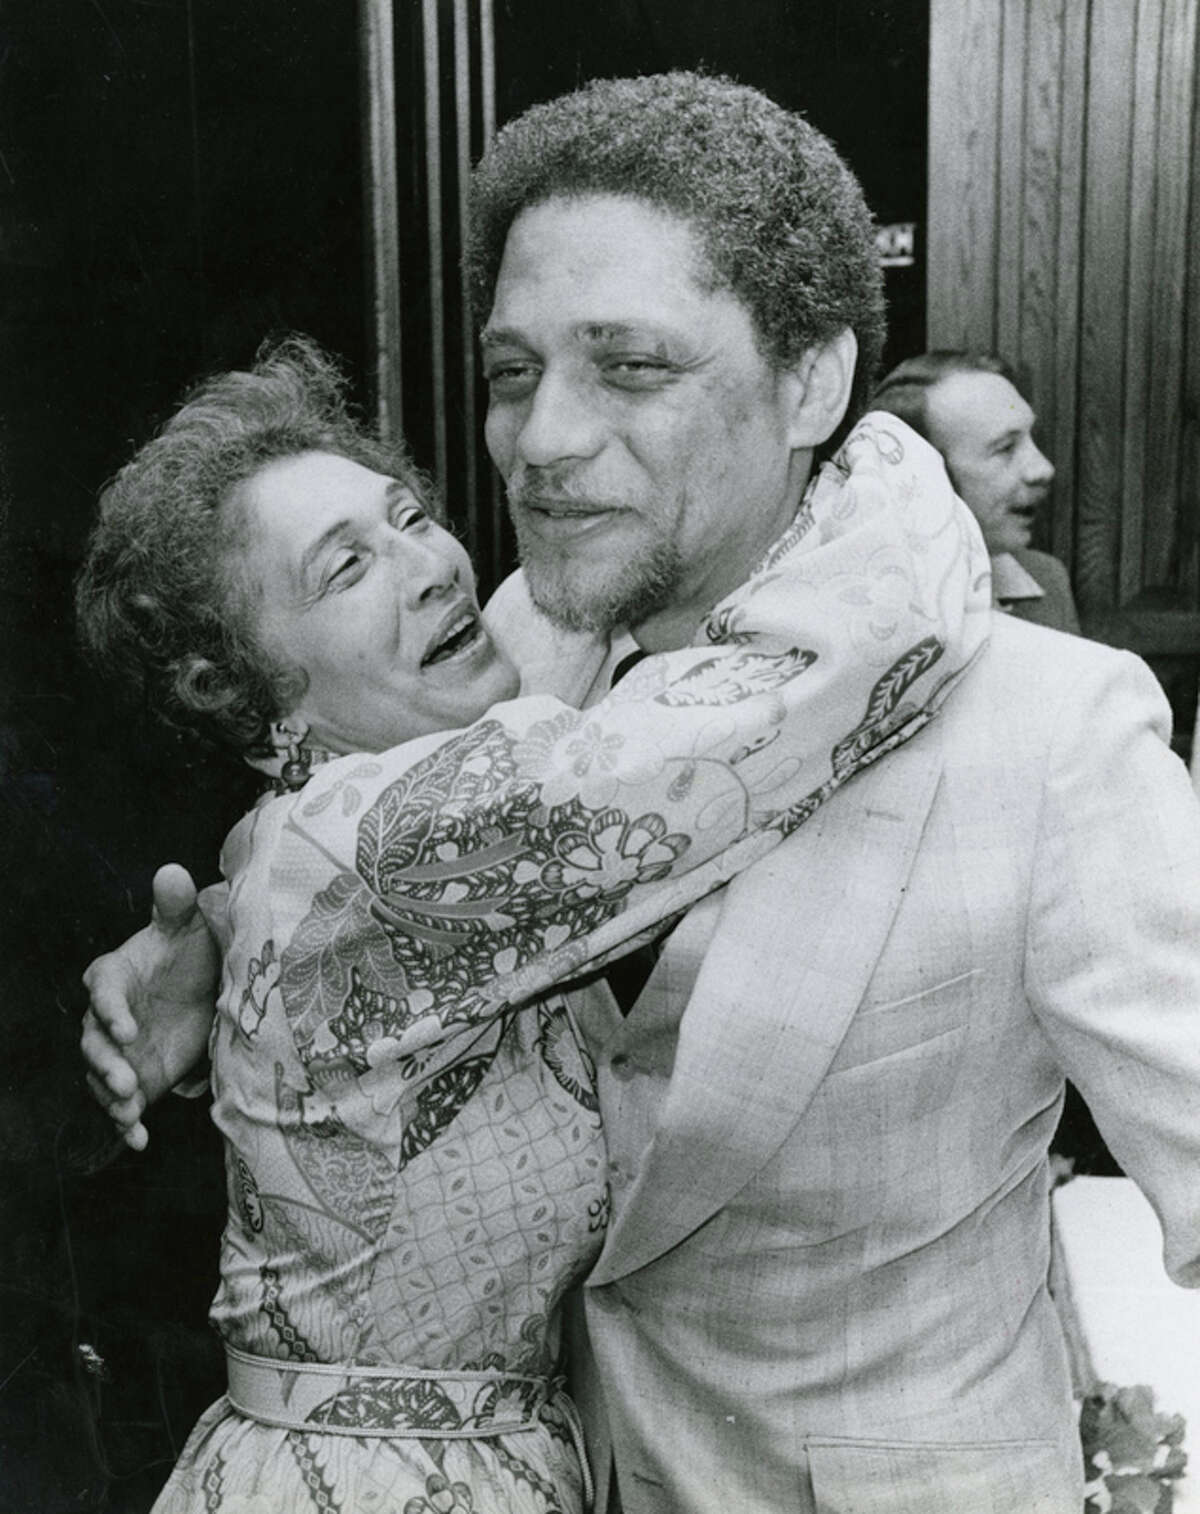 A jubilant Mickey Leland hugs his mother Alice Raines after a victory in the 1978 18th Congressional District runoff. Mickey Leland, a Democratic congressman from Texas 18th District, died Aug. 7, 1989 at age 44 when a plane he was on crashed during a mission trip in Fugnido, Ethiopia.